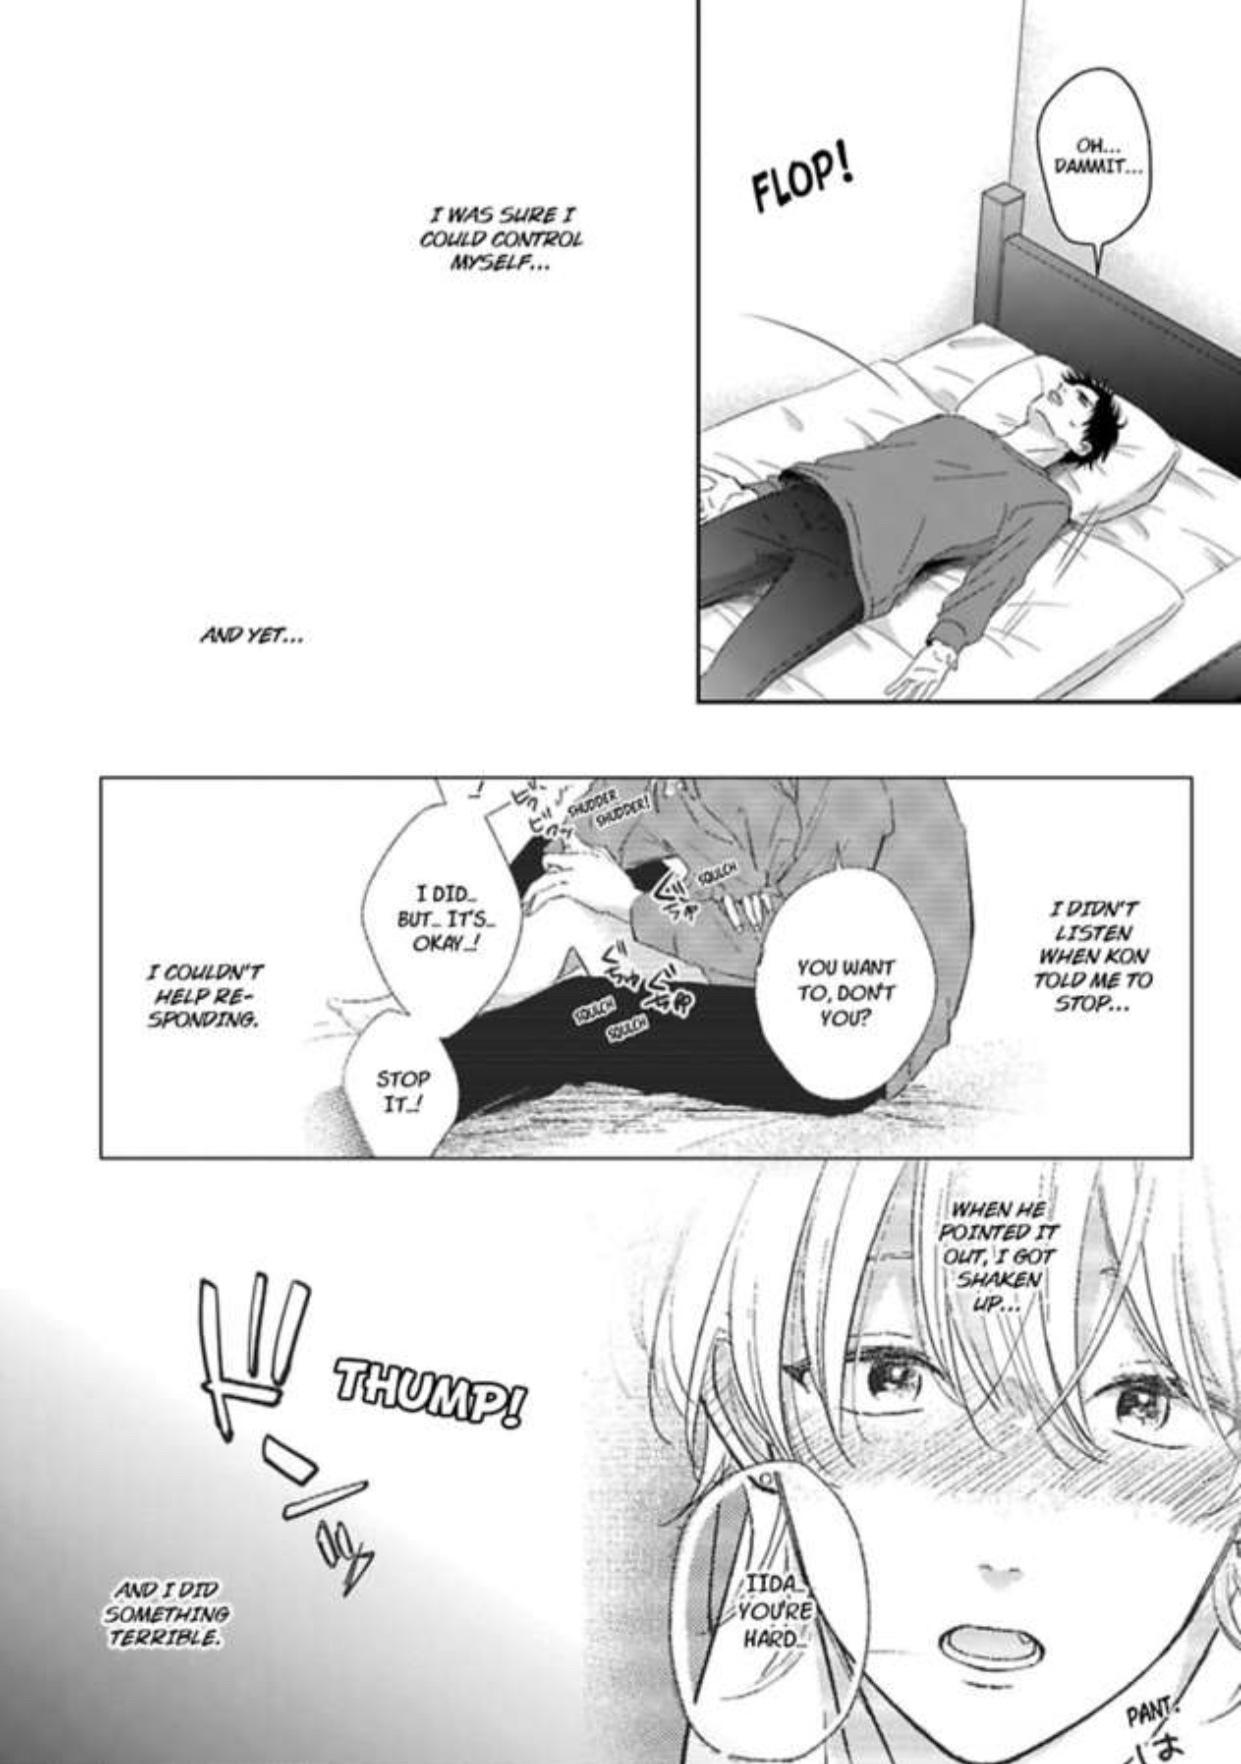 I Seriously Can't Believe You... Ch.4